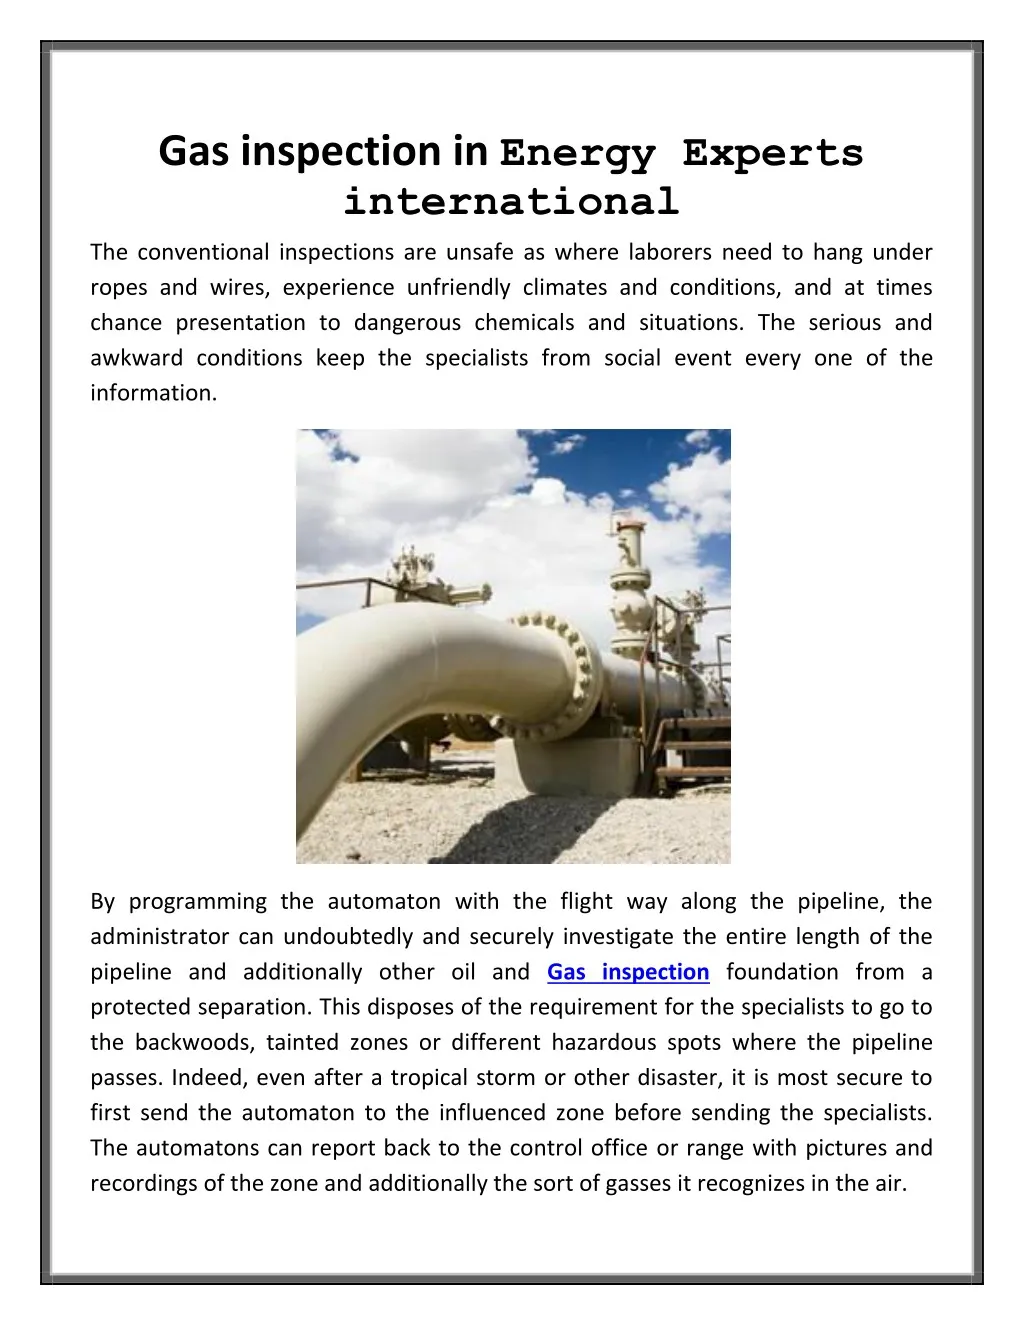 gas inspection in energy experts international